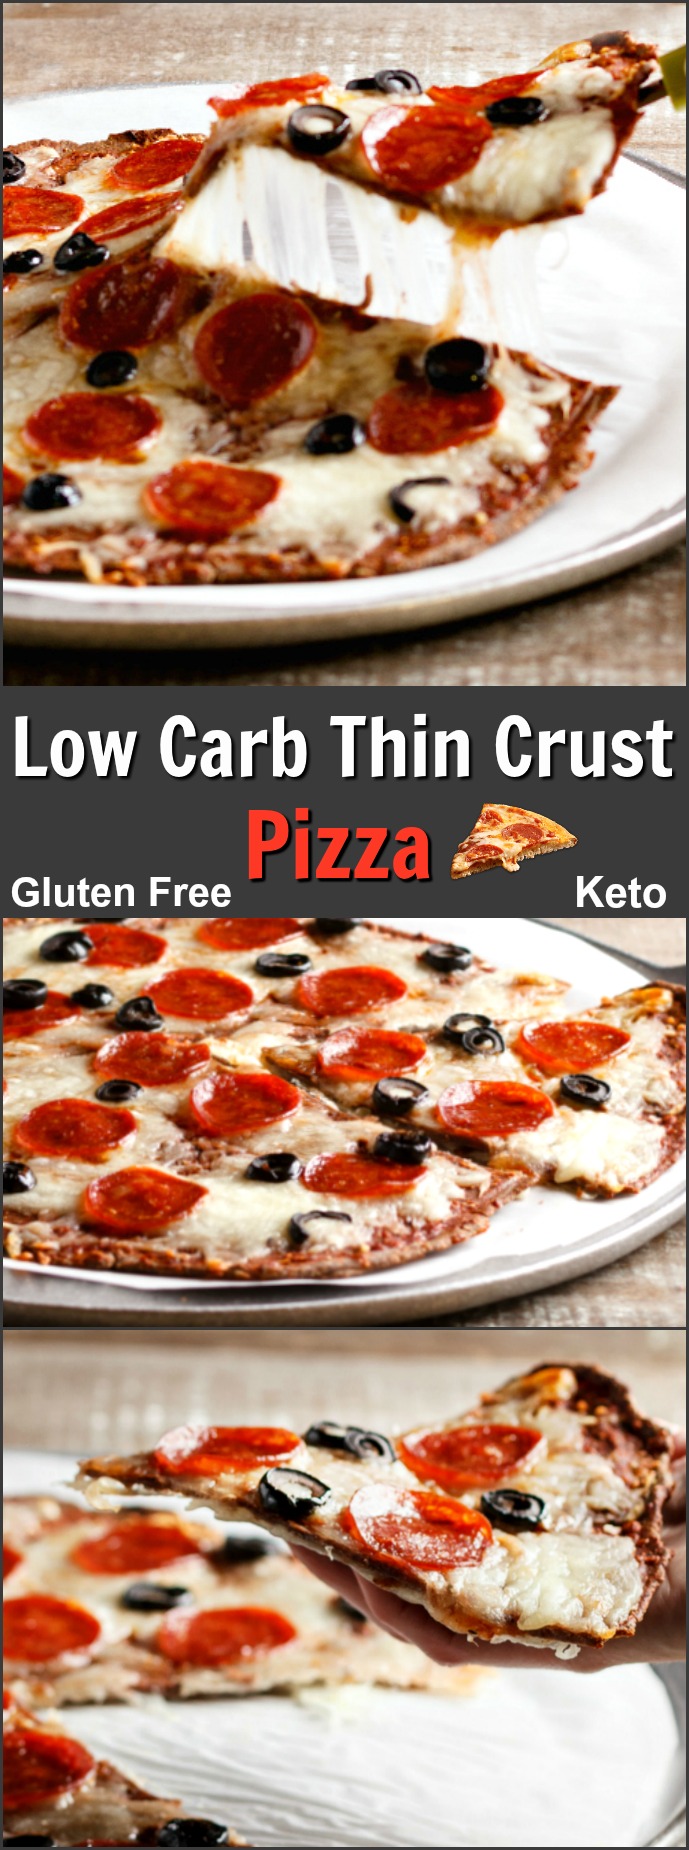 Low Carb Thin Crust Pizza-My Best Gluten Free, low carb, keto, thin crust pizza dough.